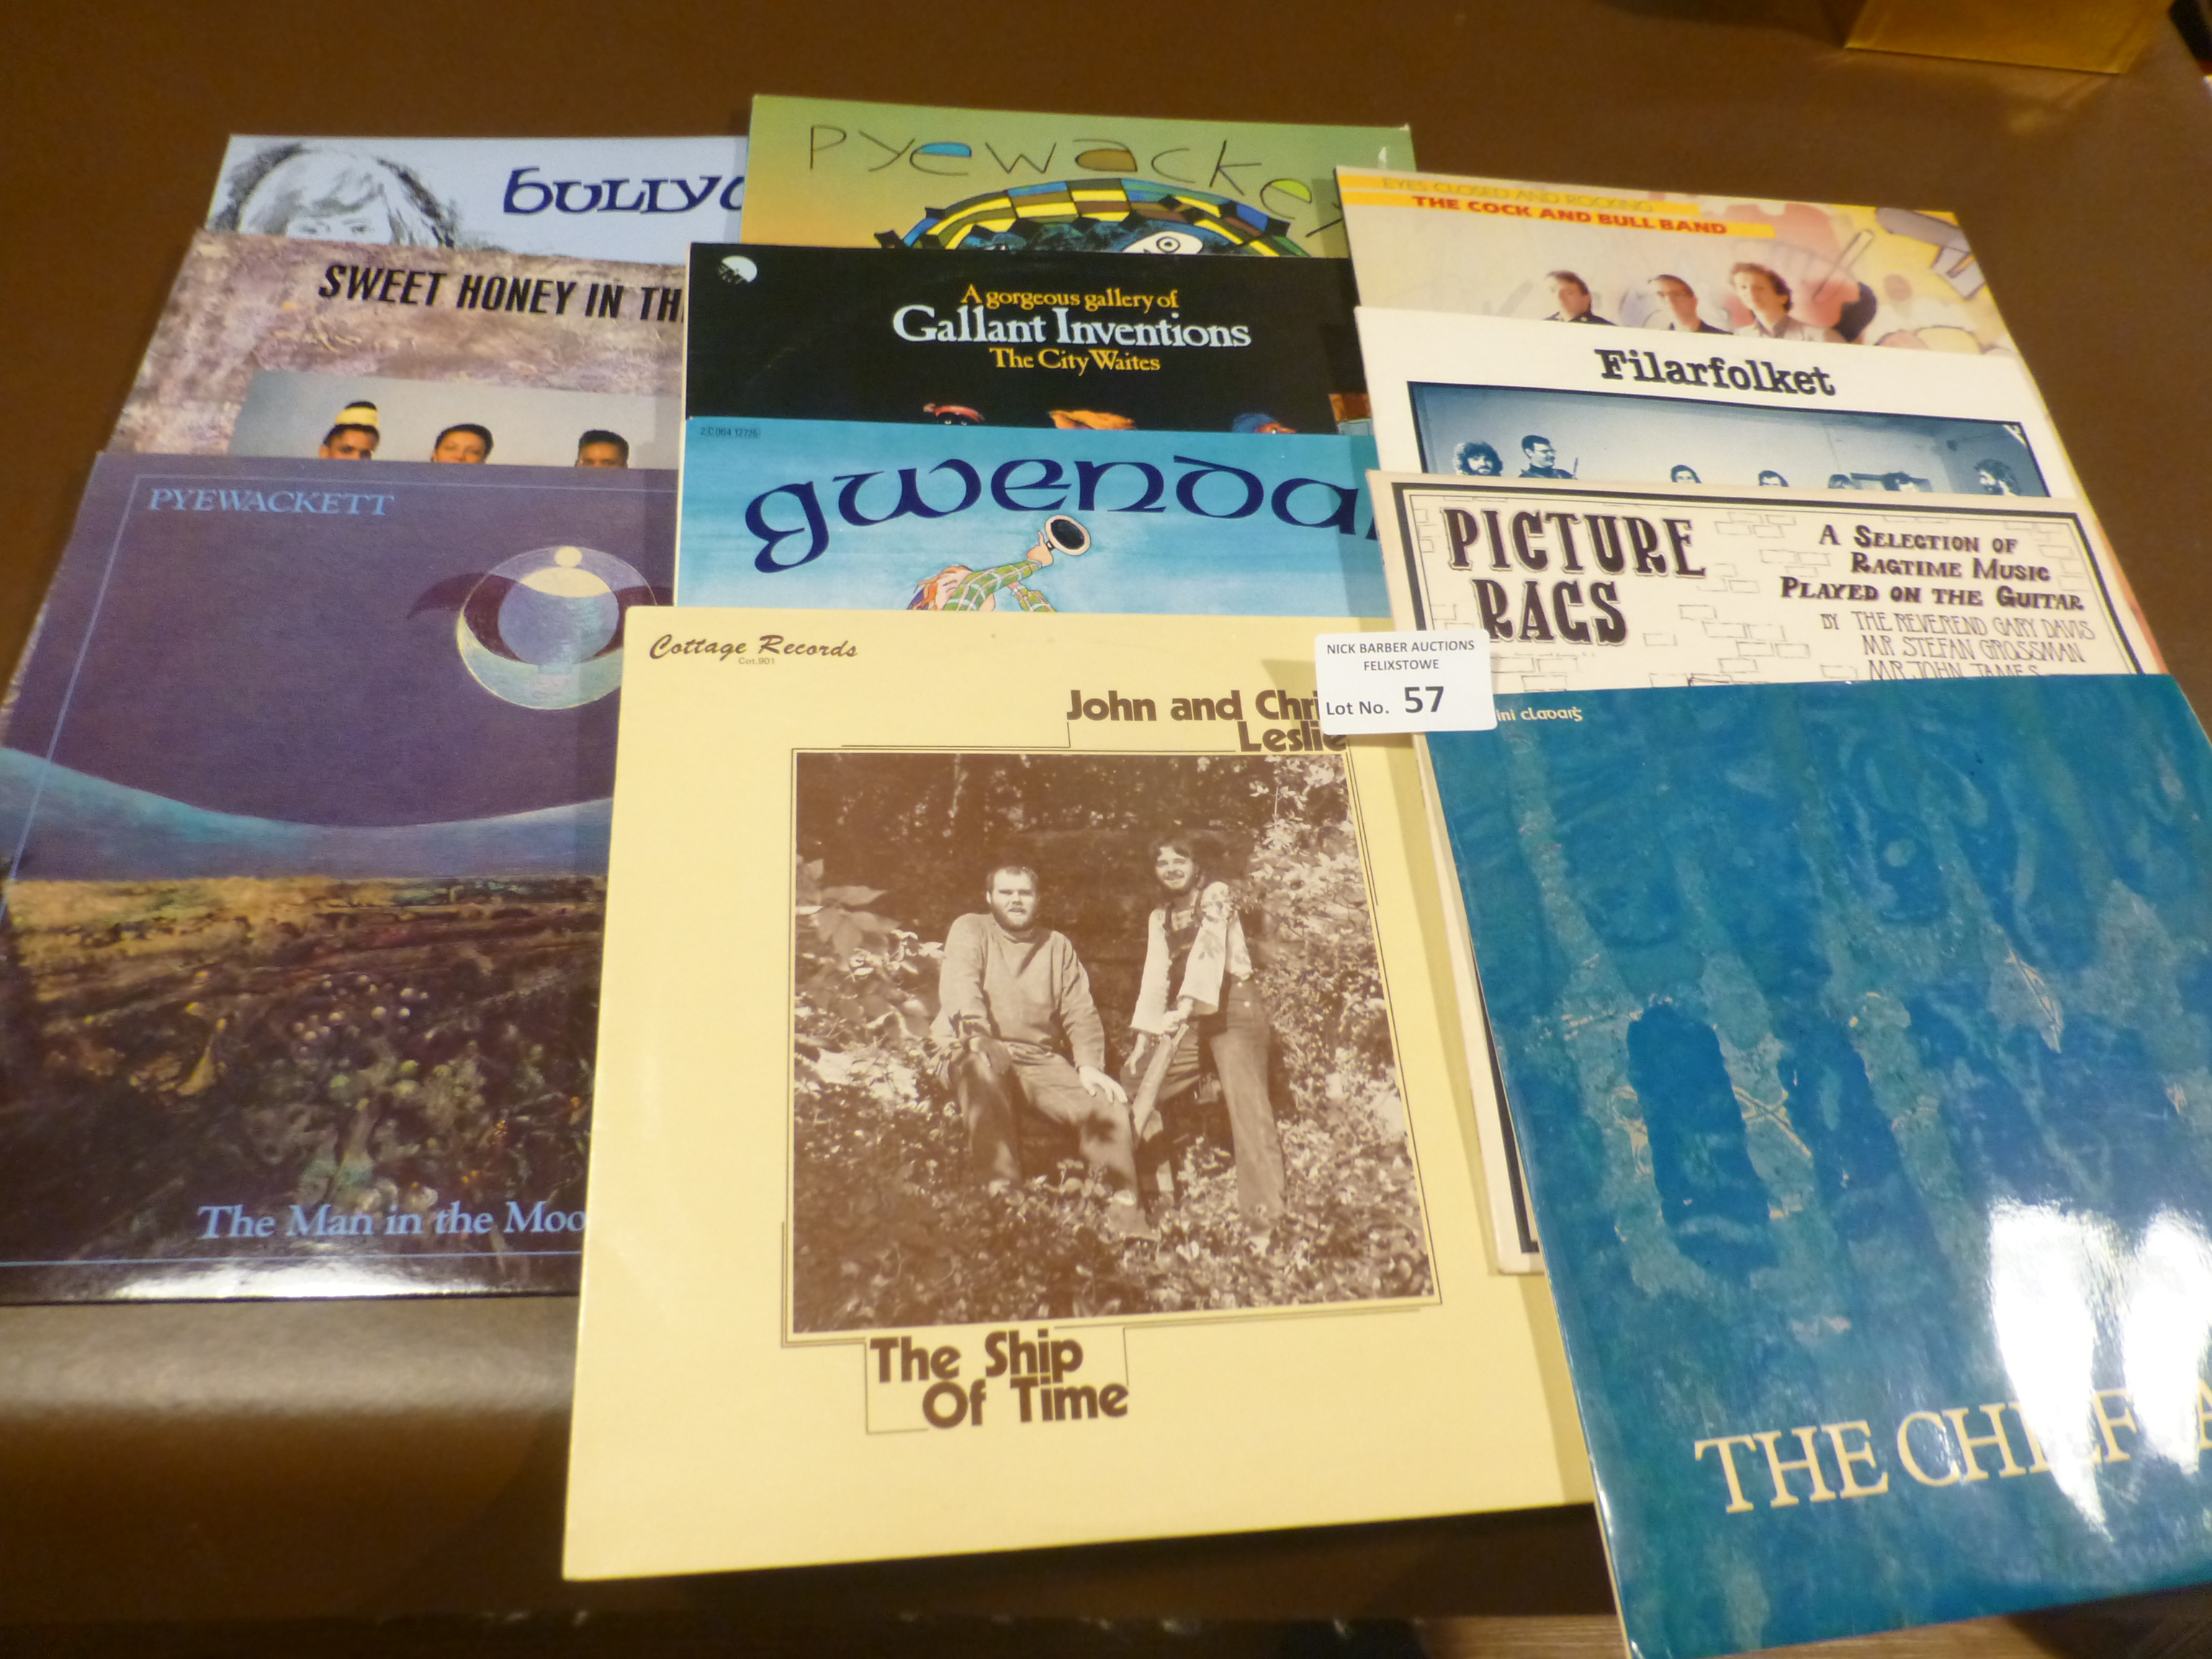 Records : Folk - super collection of 11 collectabl